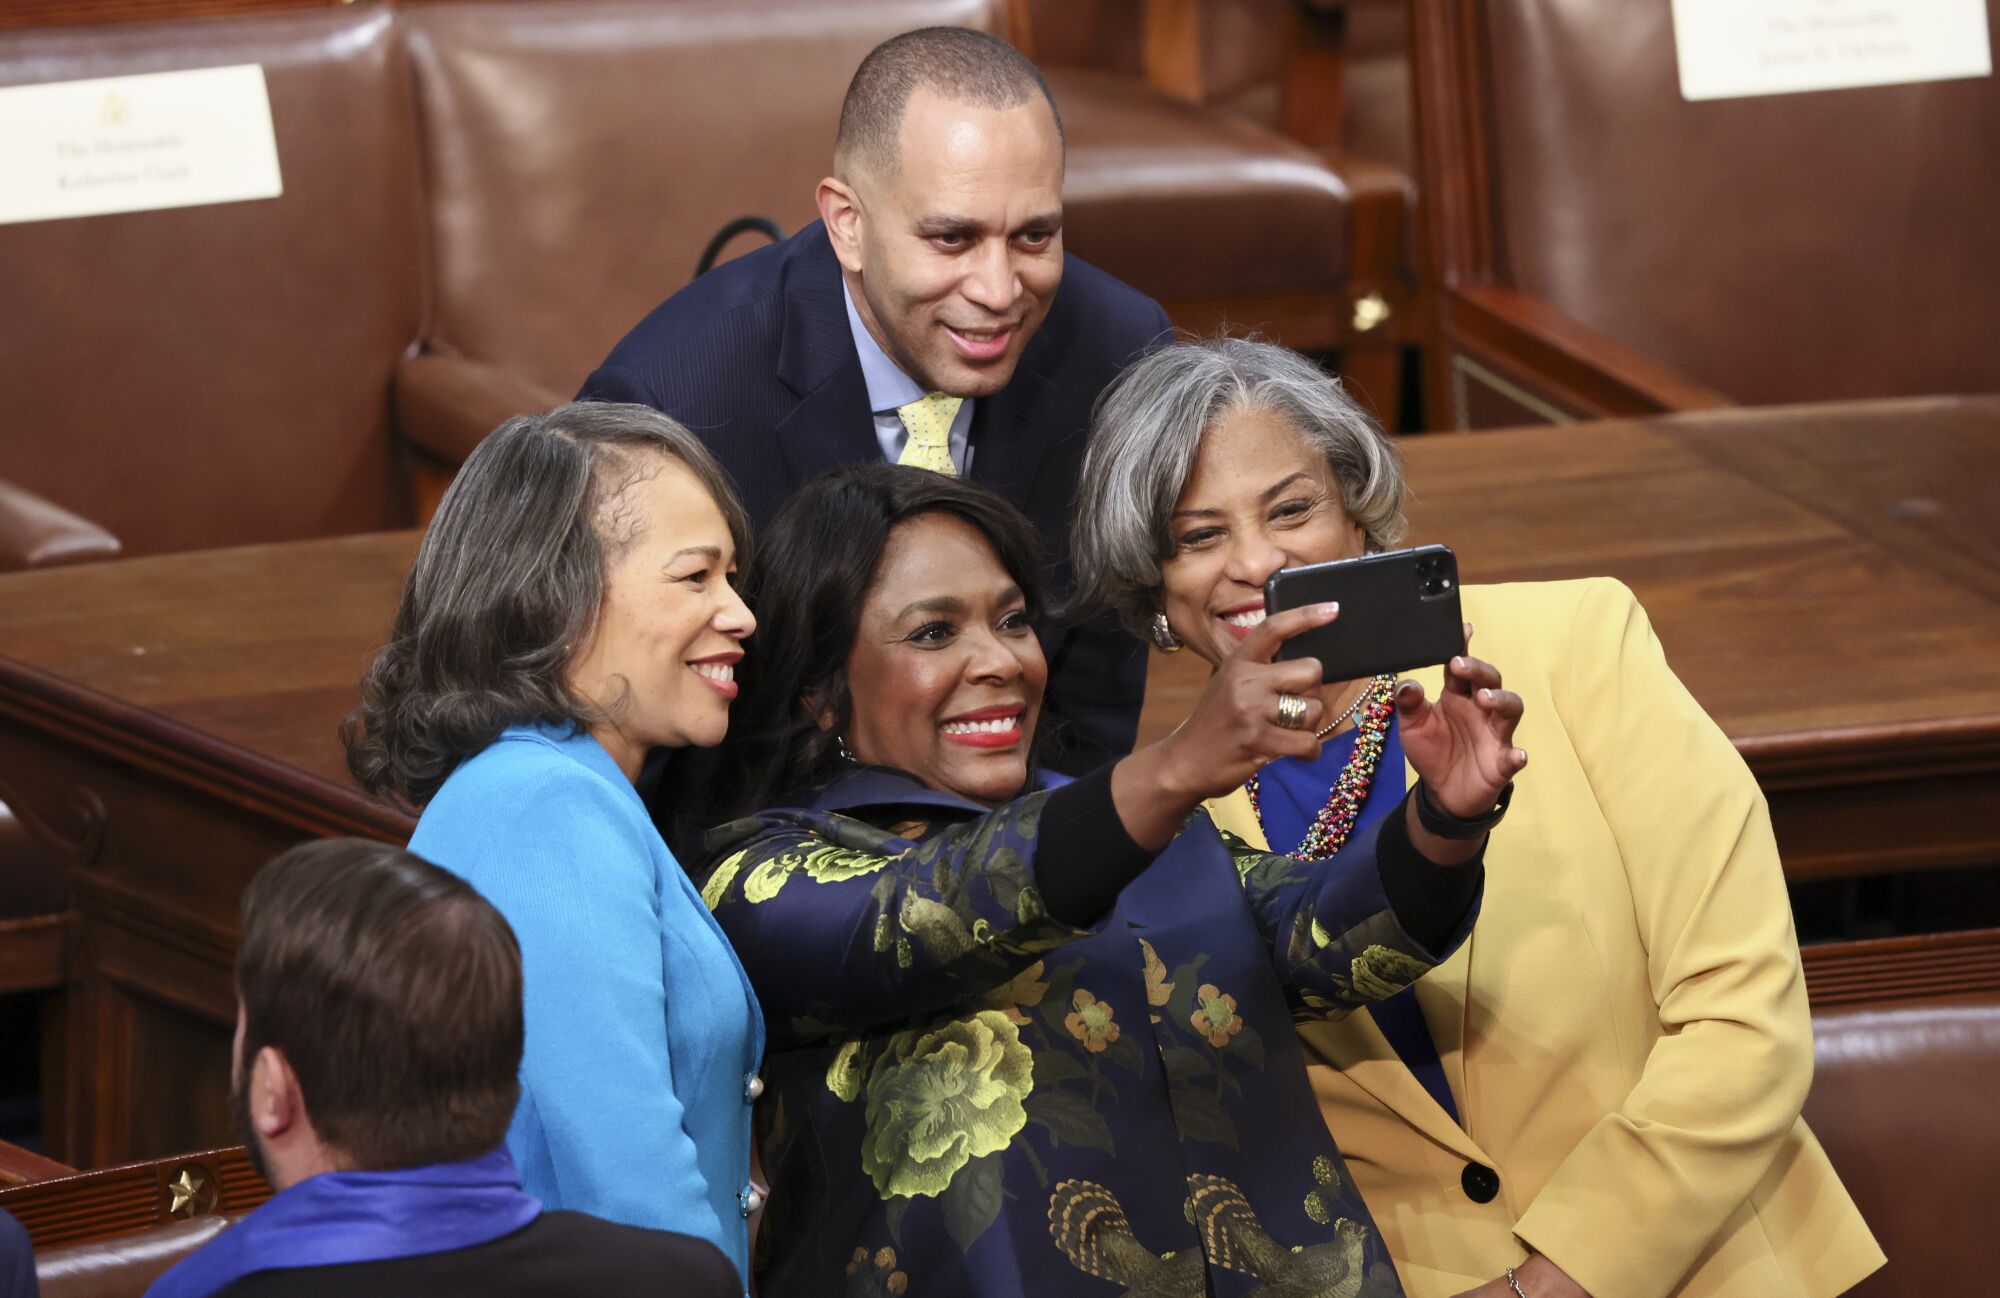 Four lawmakers take a picture.